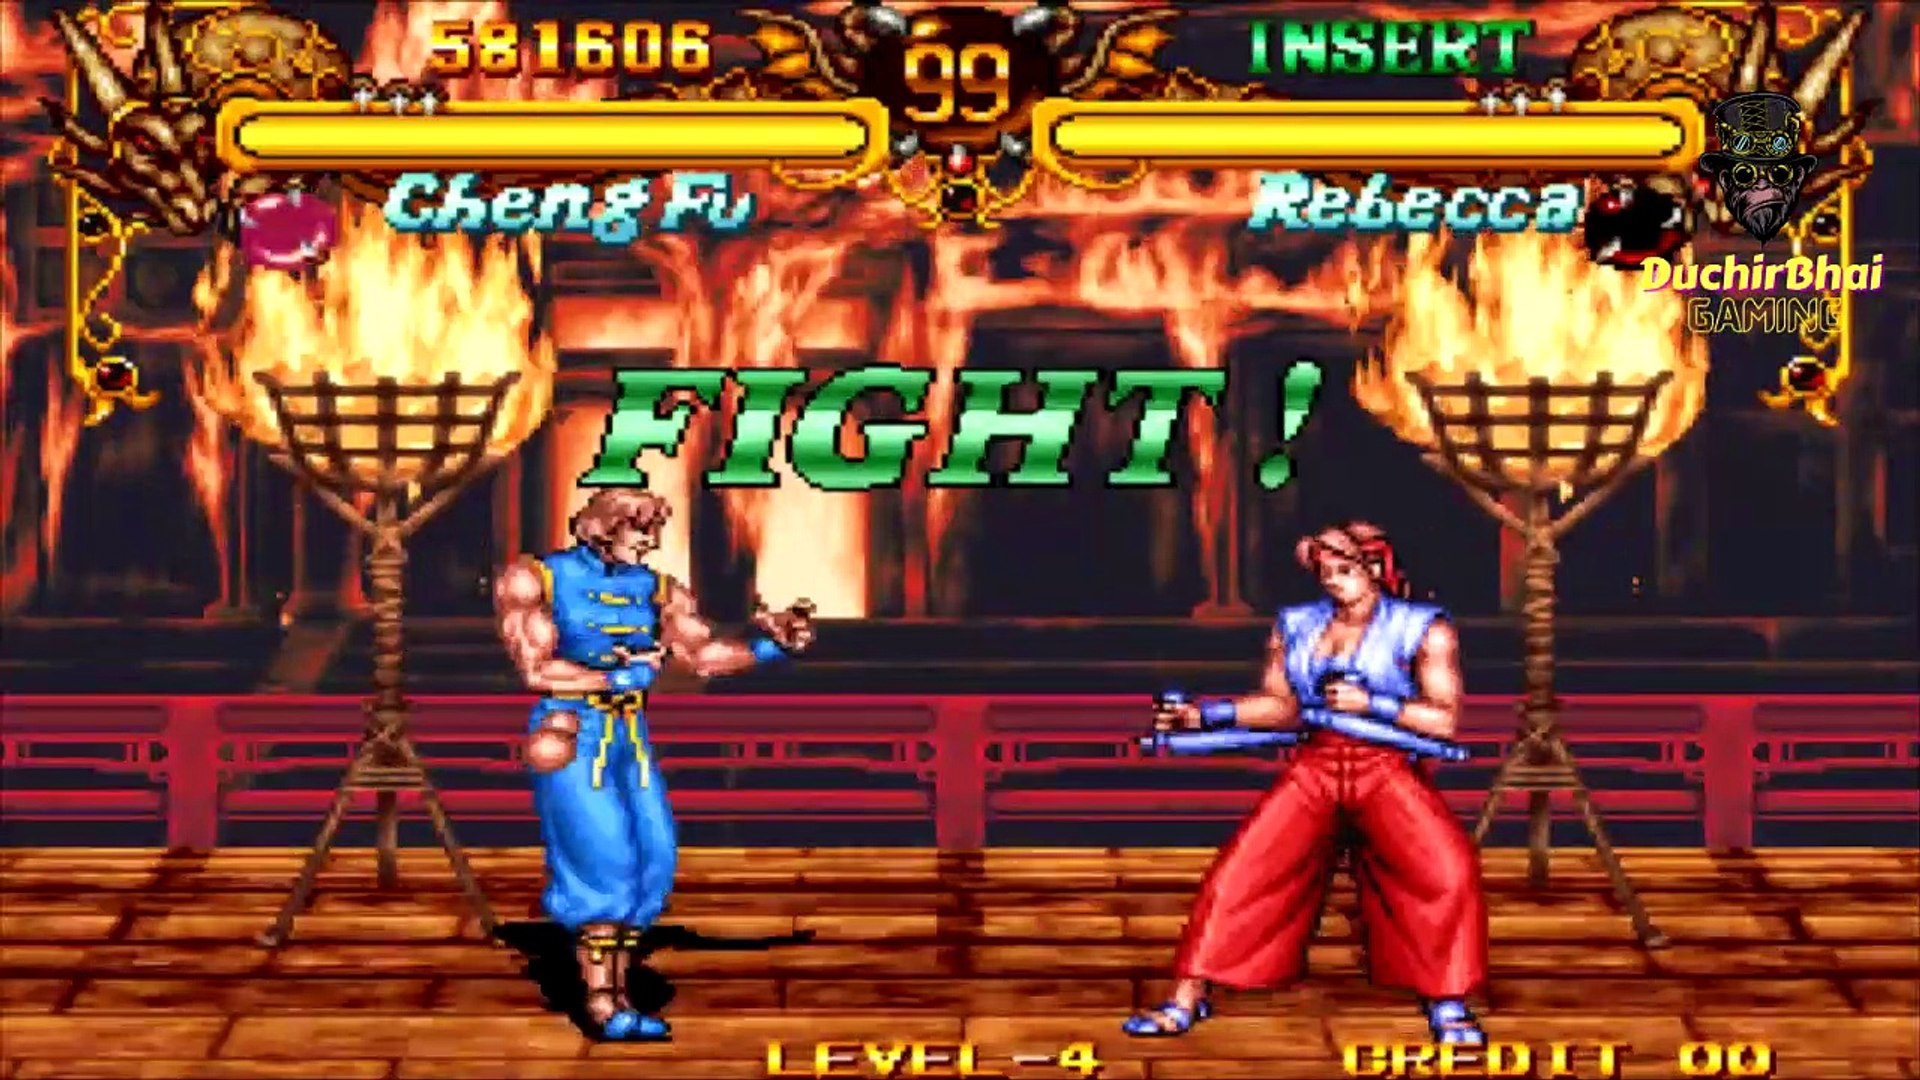 Double Dragon Cheng-Fu VS Rebeca Fight #gaming - video Dailymotion